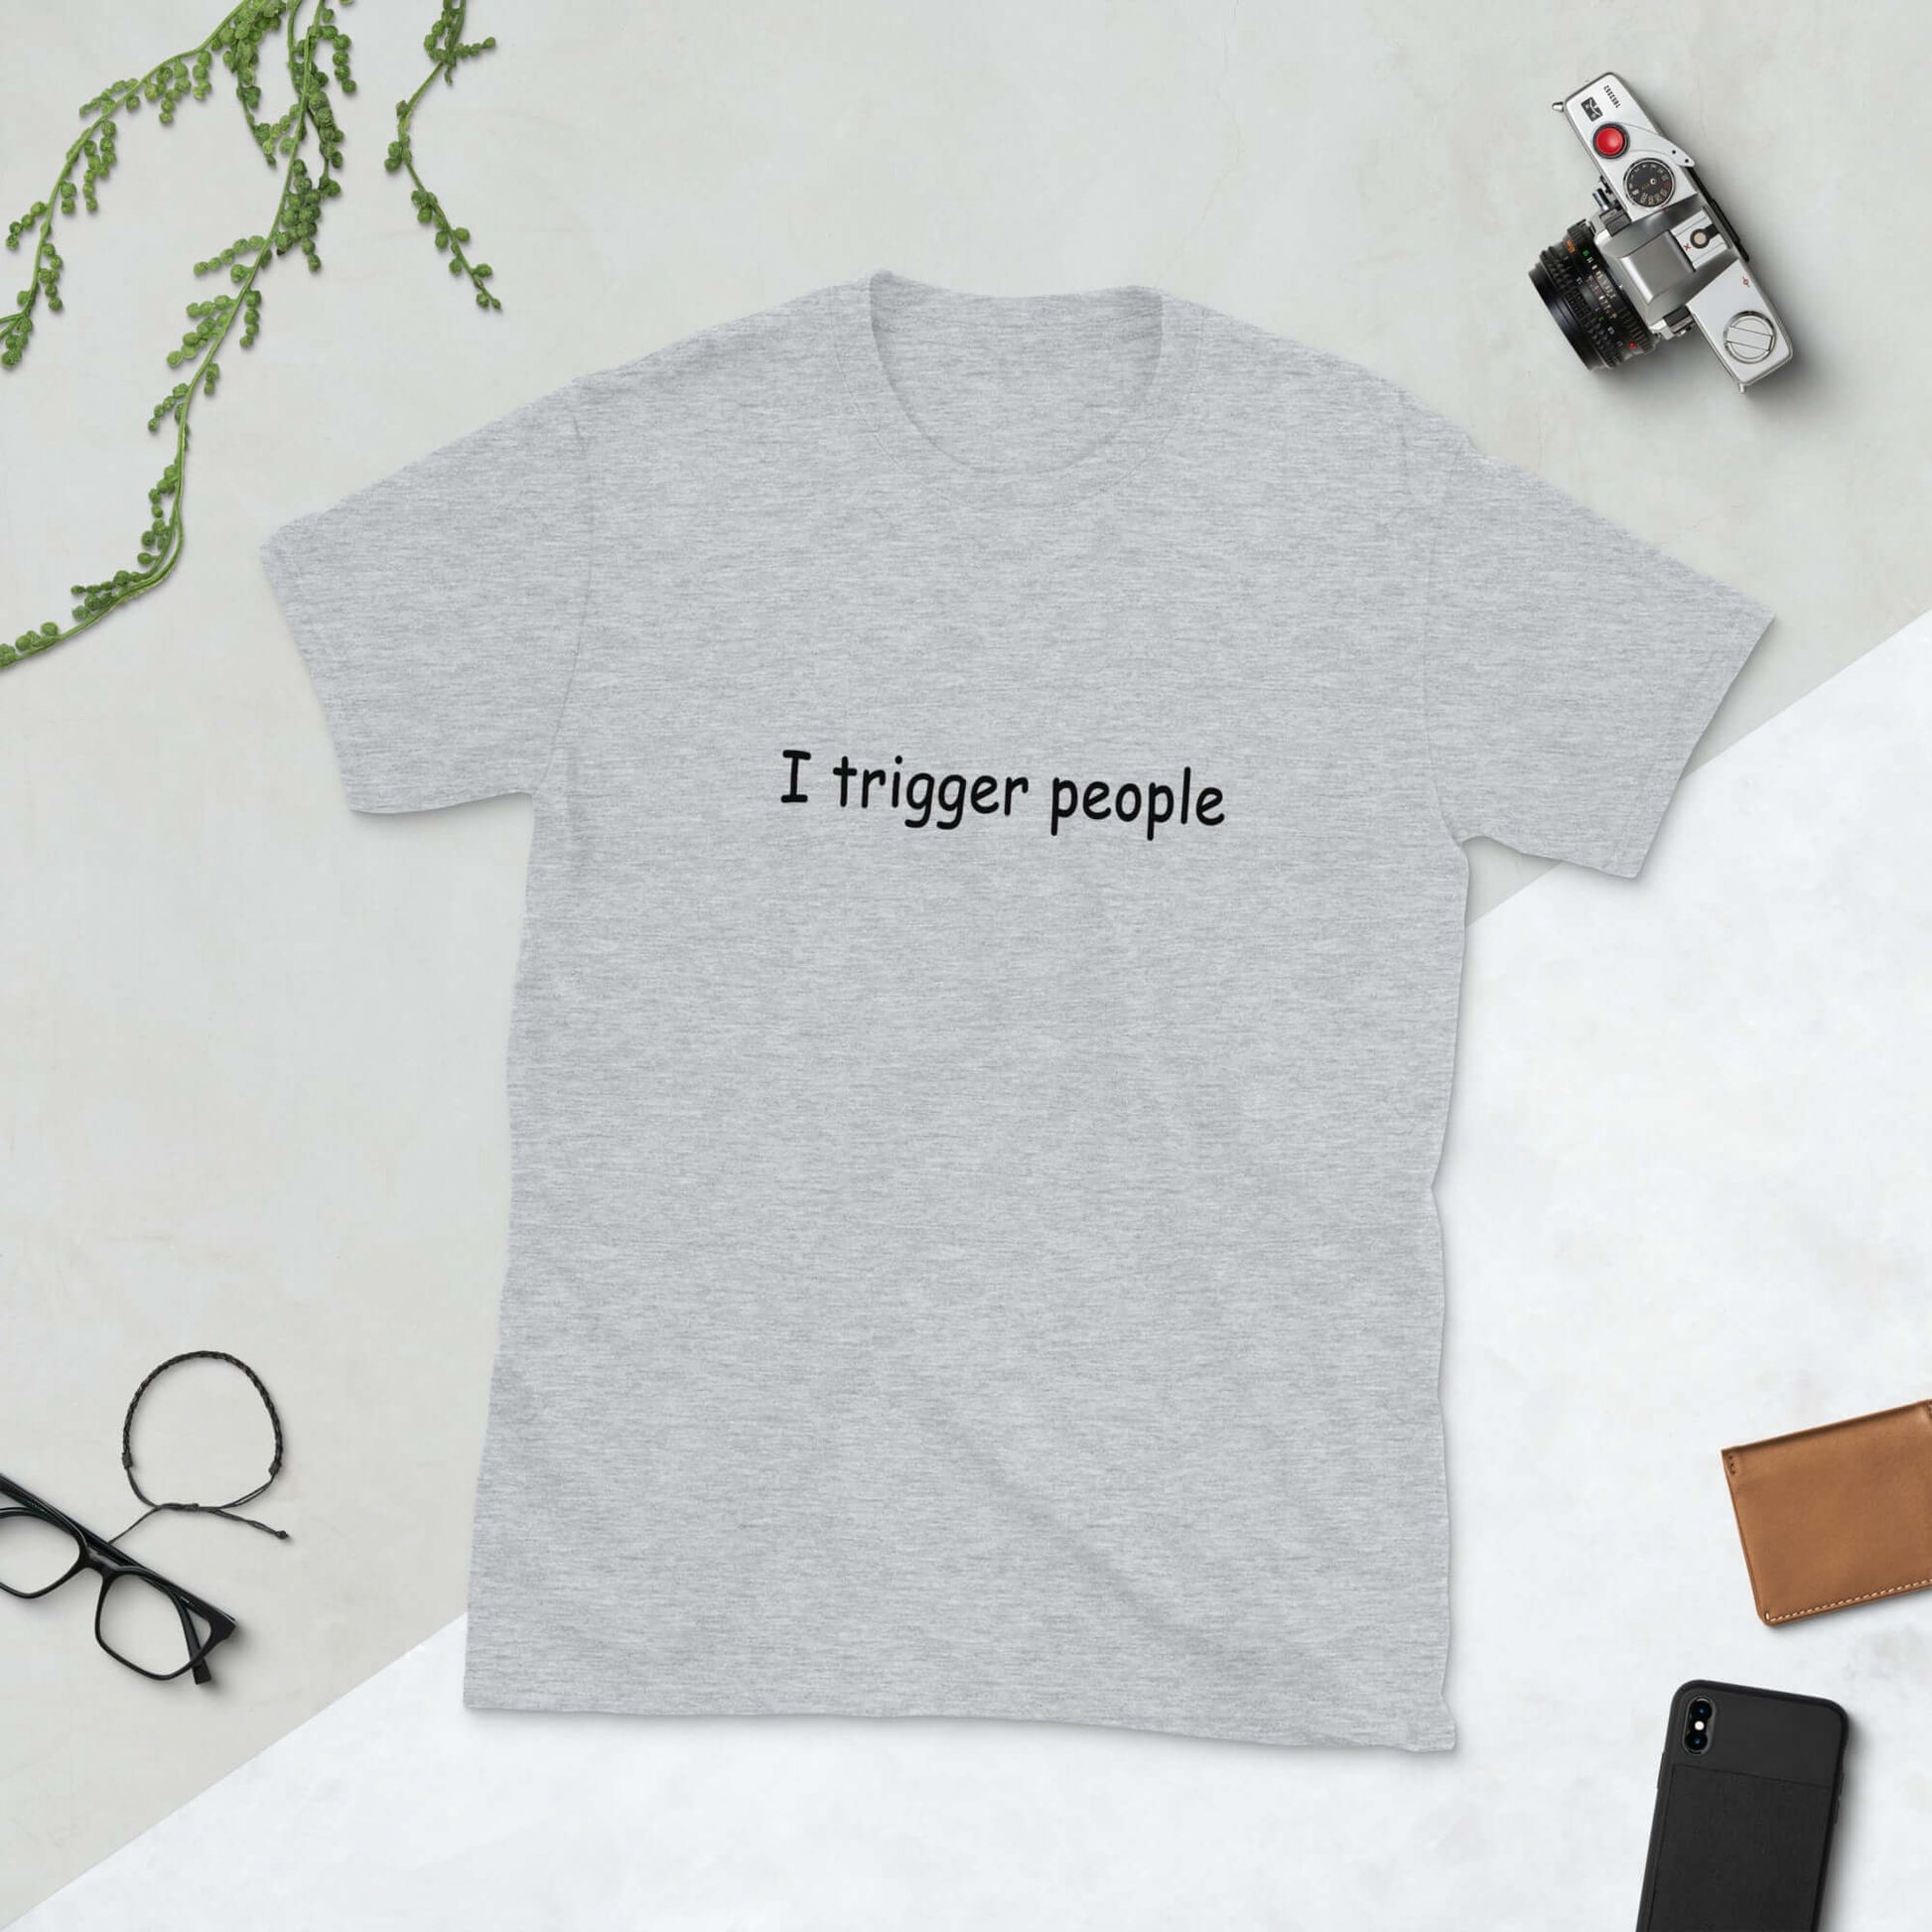 Light sport grey t-shirt with the phrase I trigger people printed on the front.